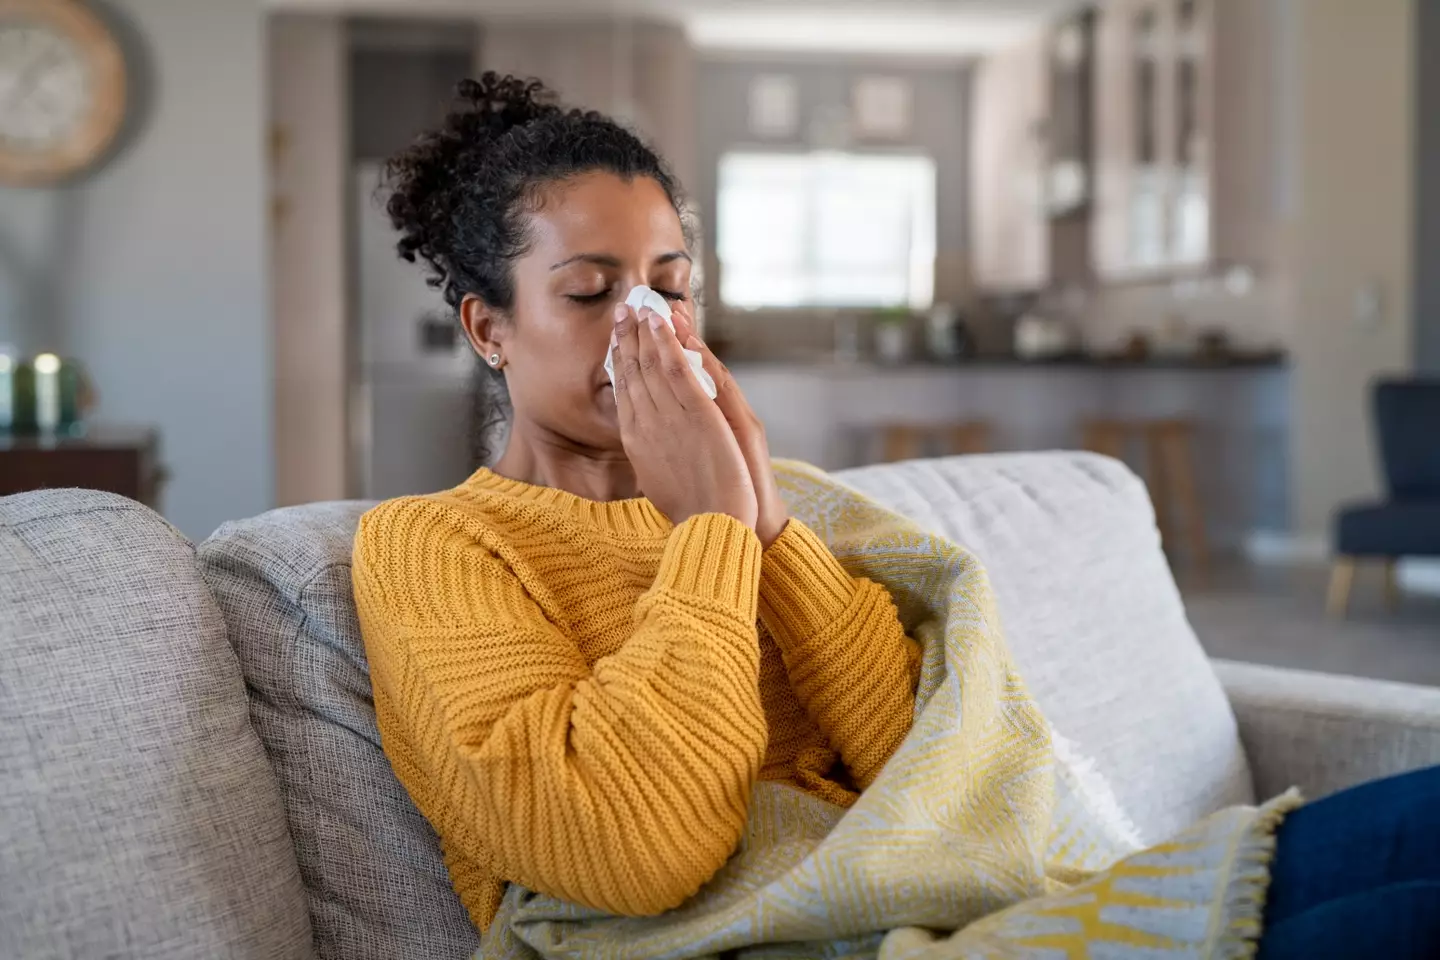 Colds can spread before you even start showing symptoms.